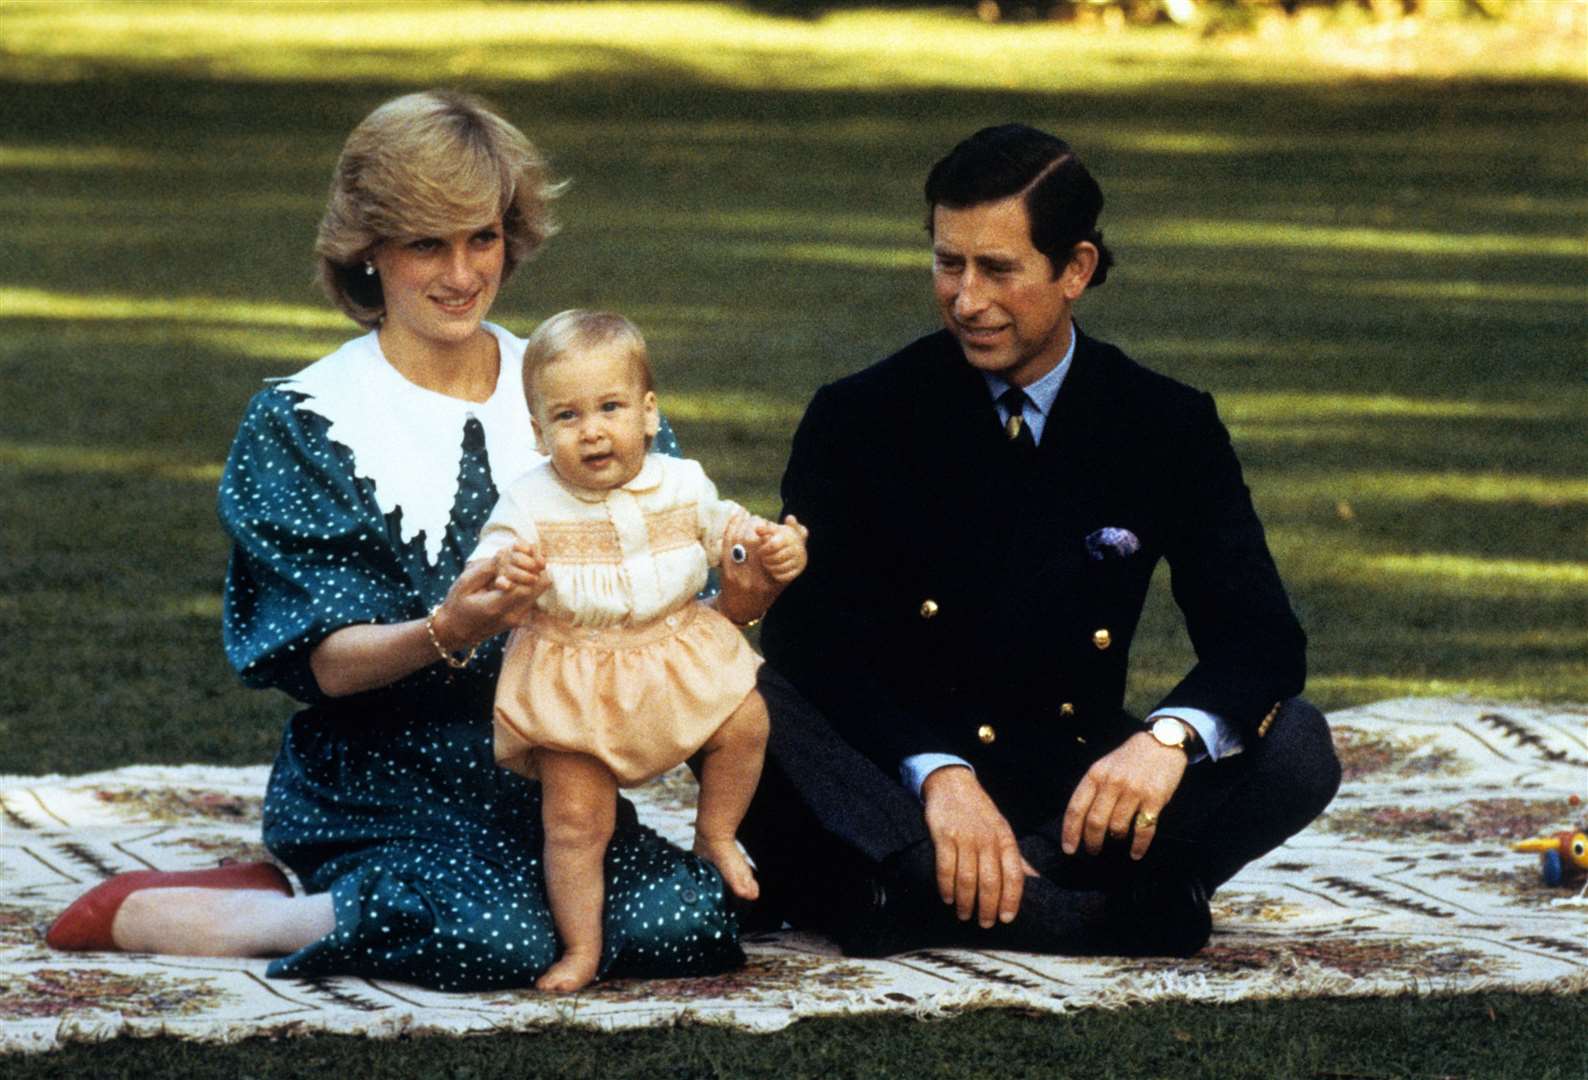 The Prince and Princess of Wales amuse baby Prince William in the grounds of Government House in Auckland, New Zealand in 1983 (PA)